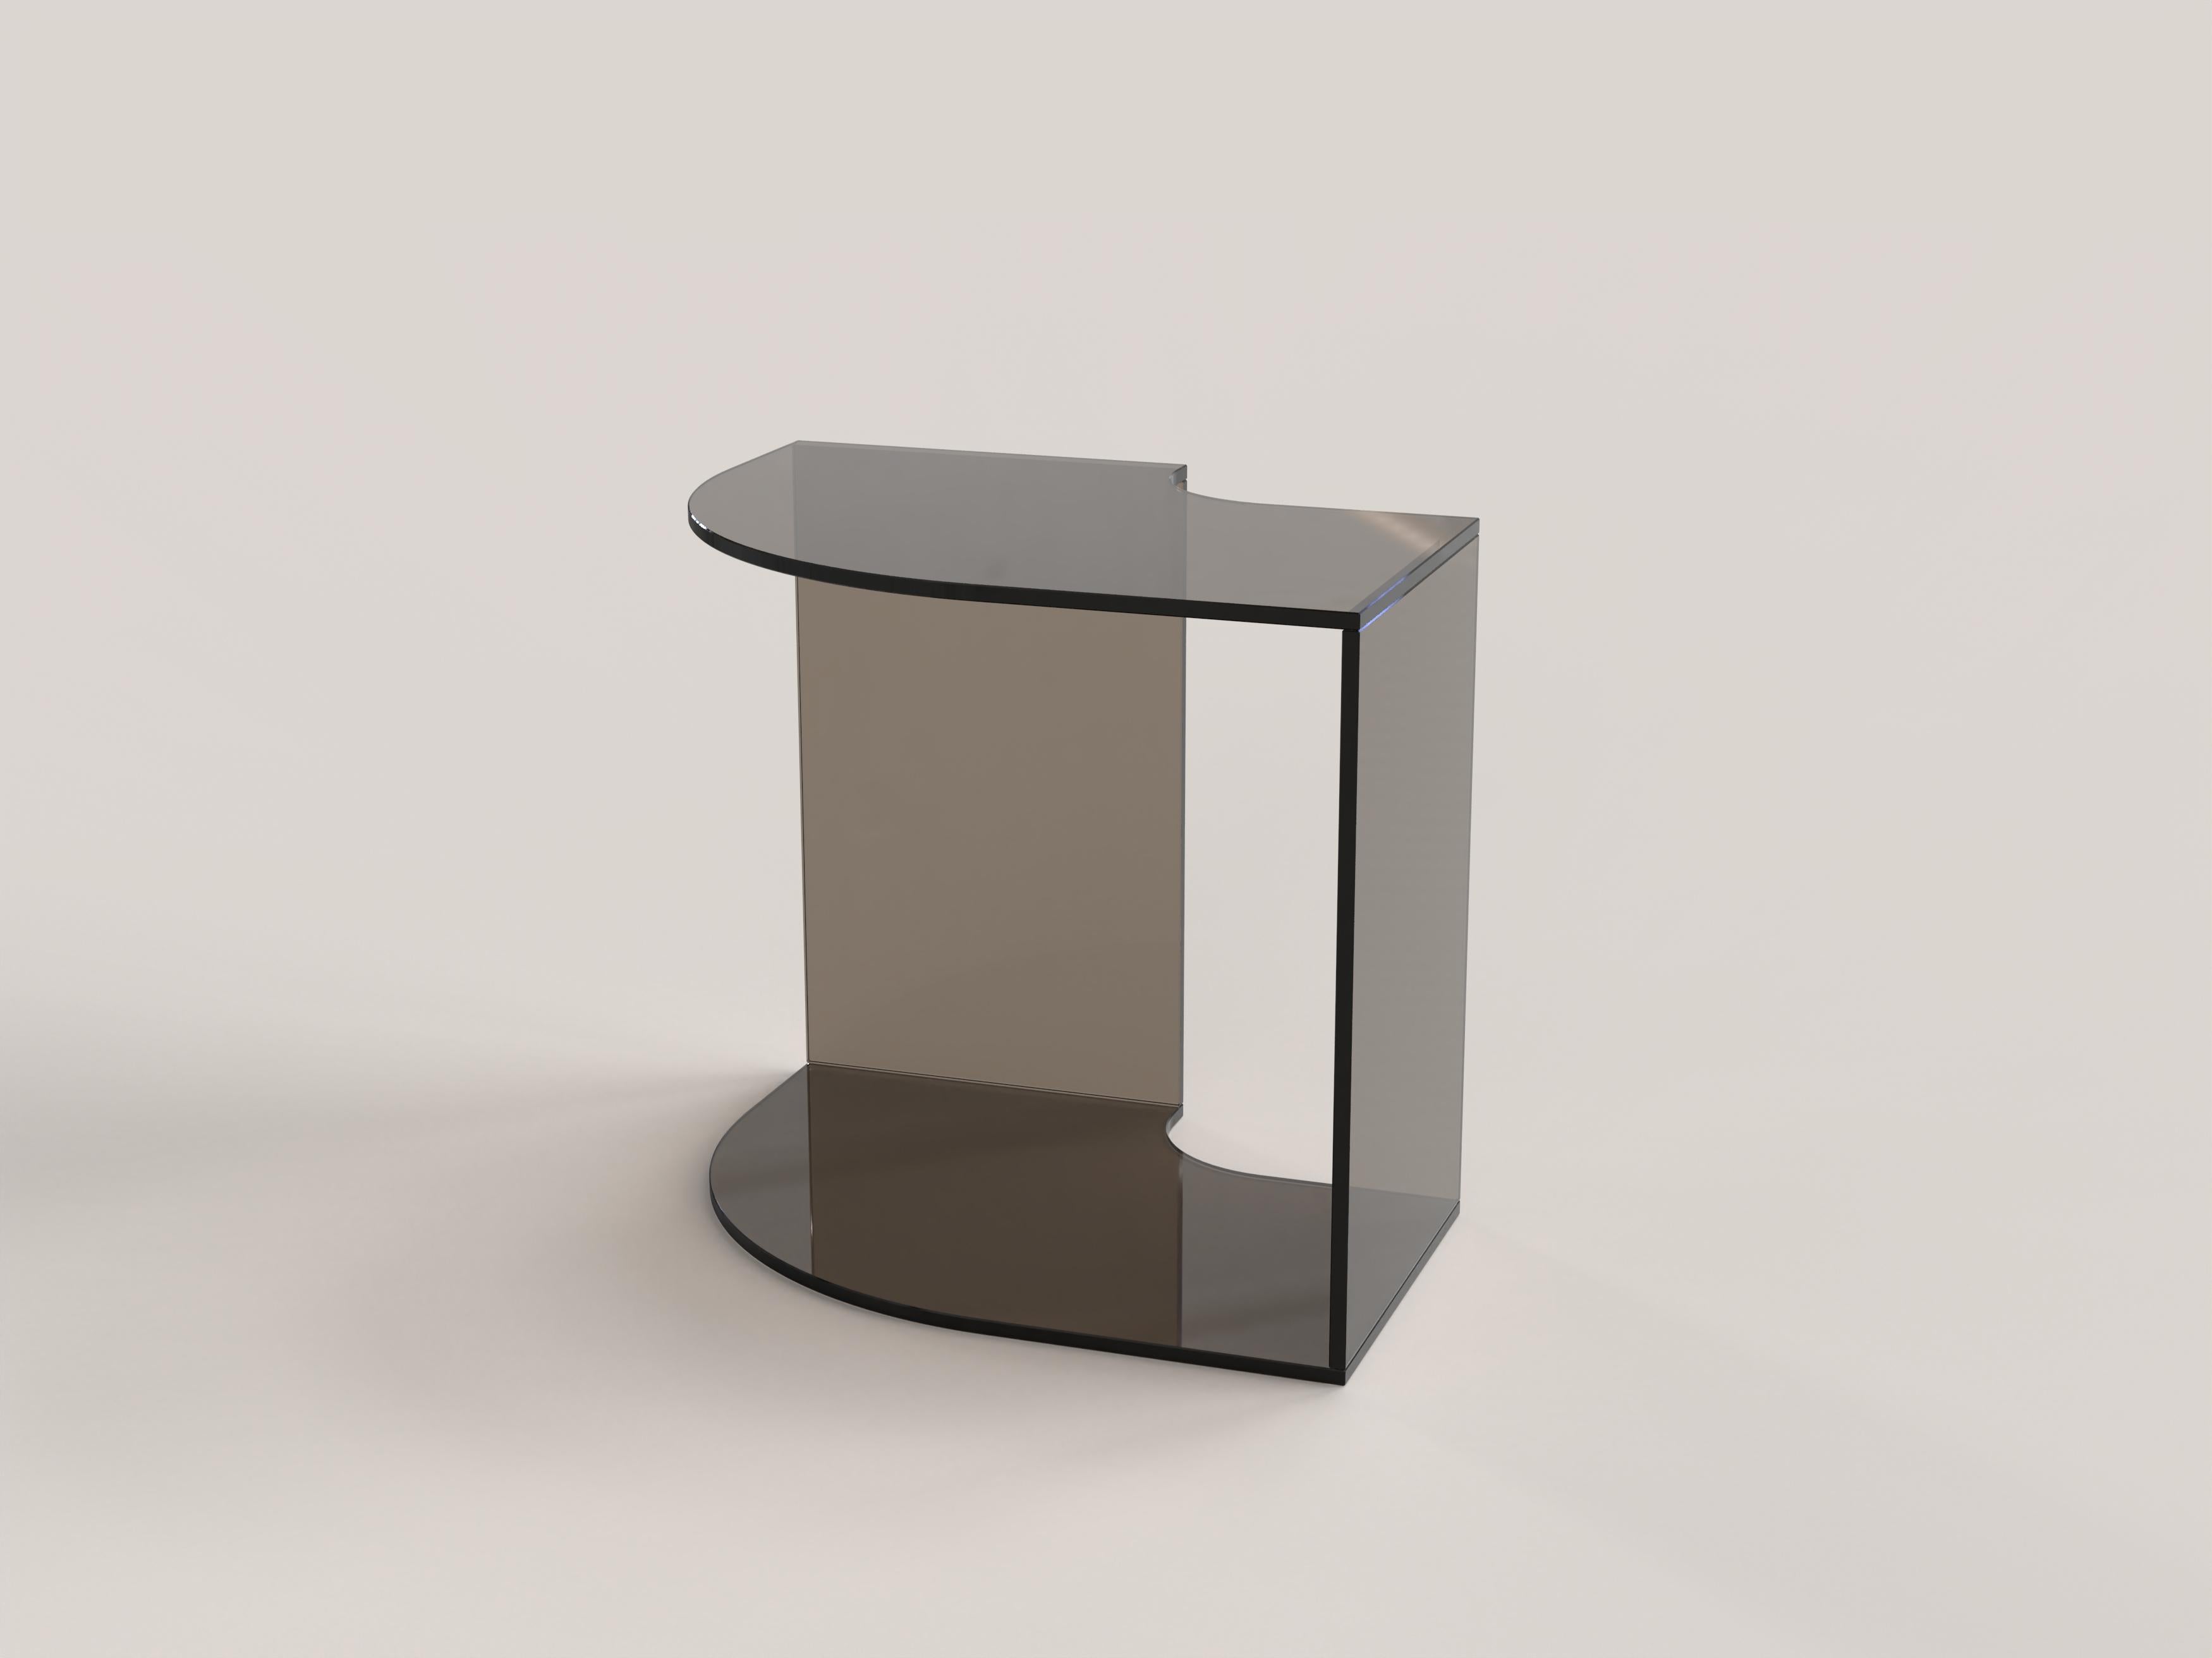 Quarter V1 Side Table by Edizione Limitata
Limited Edition of 1000 pieces. Signed and numbered.
Dimensions: D 45 x W 35 x H 41 cm.
Materials: Bronze tempered glass.

Quarter is a collection of contemporary side tables made by Italian artisans in